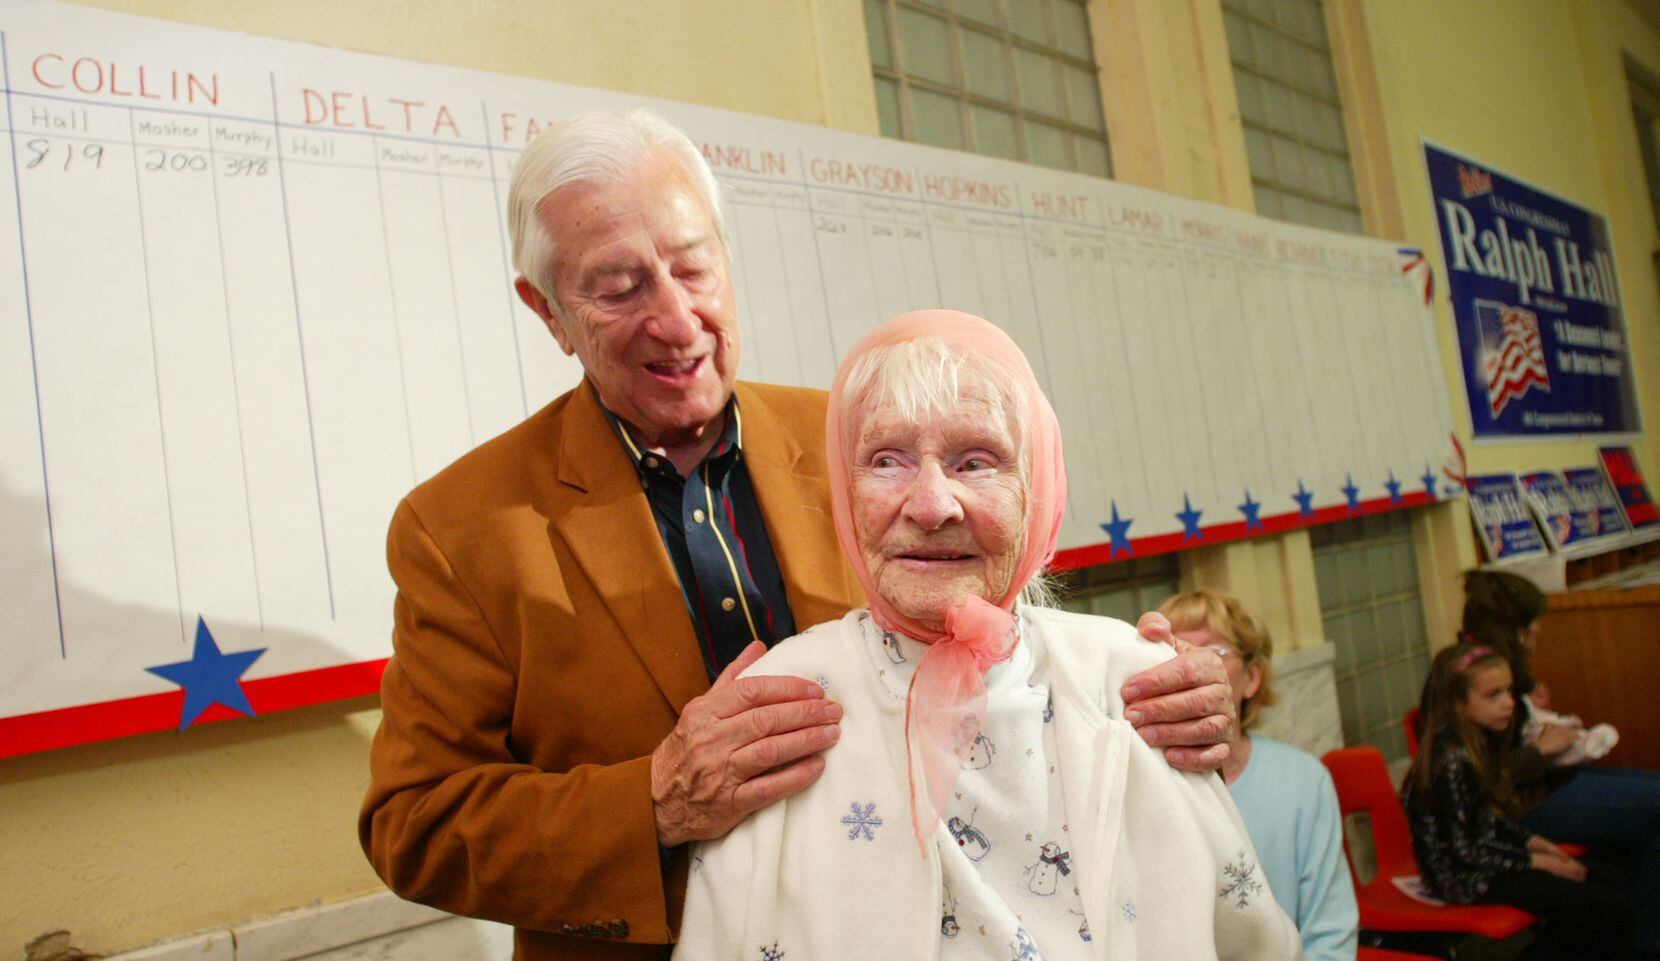 Rep. Ralph Hall introduced his oldest supporter at the time, Mable Dalton, 96, at an...